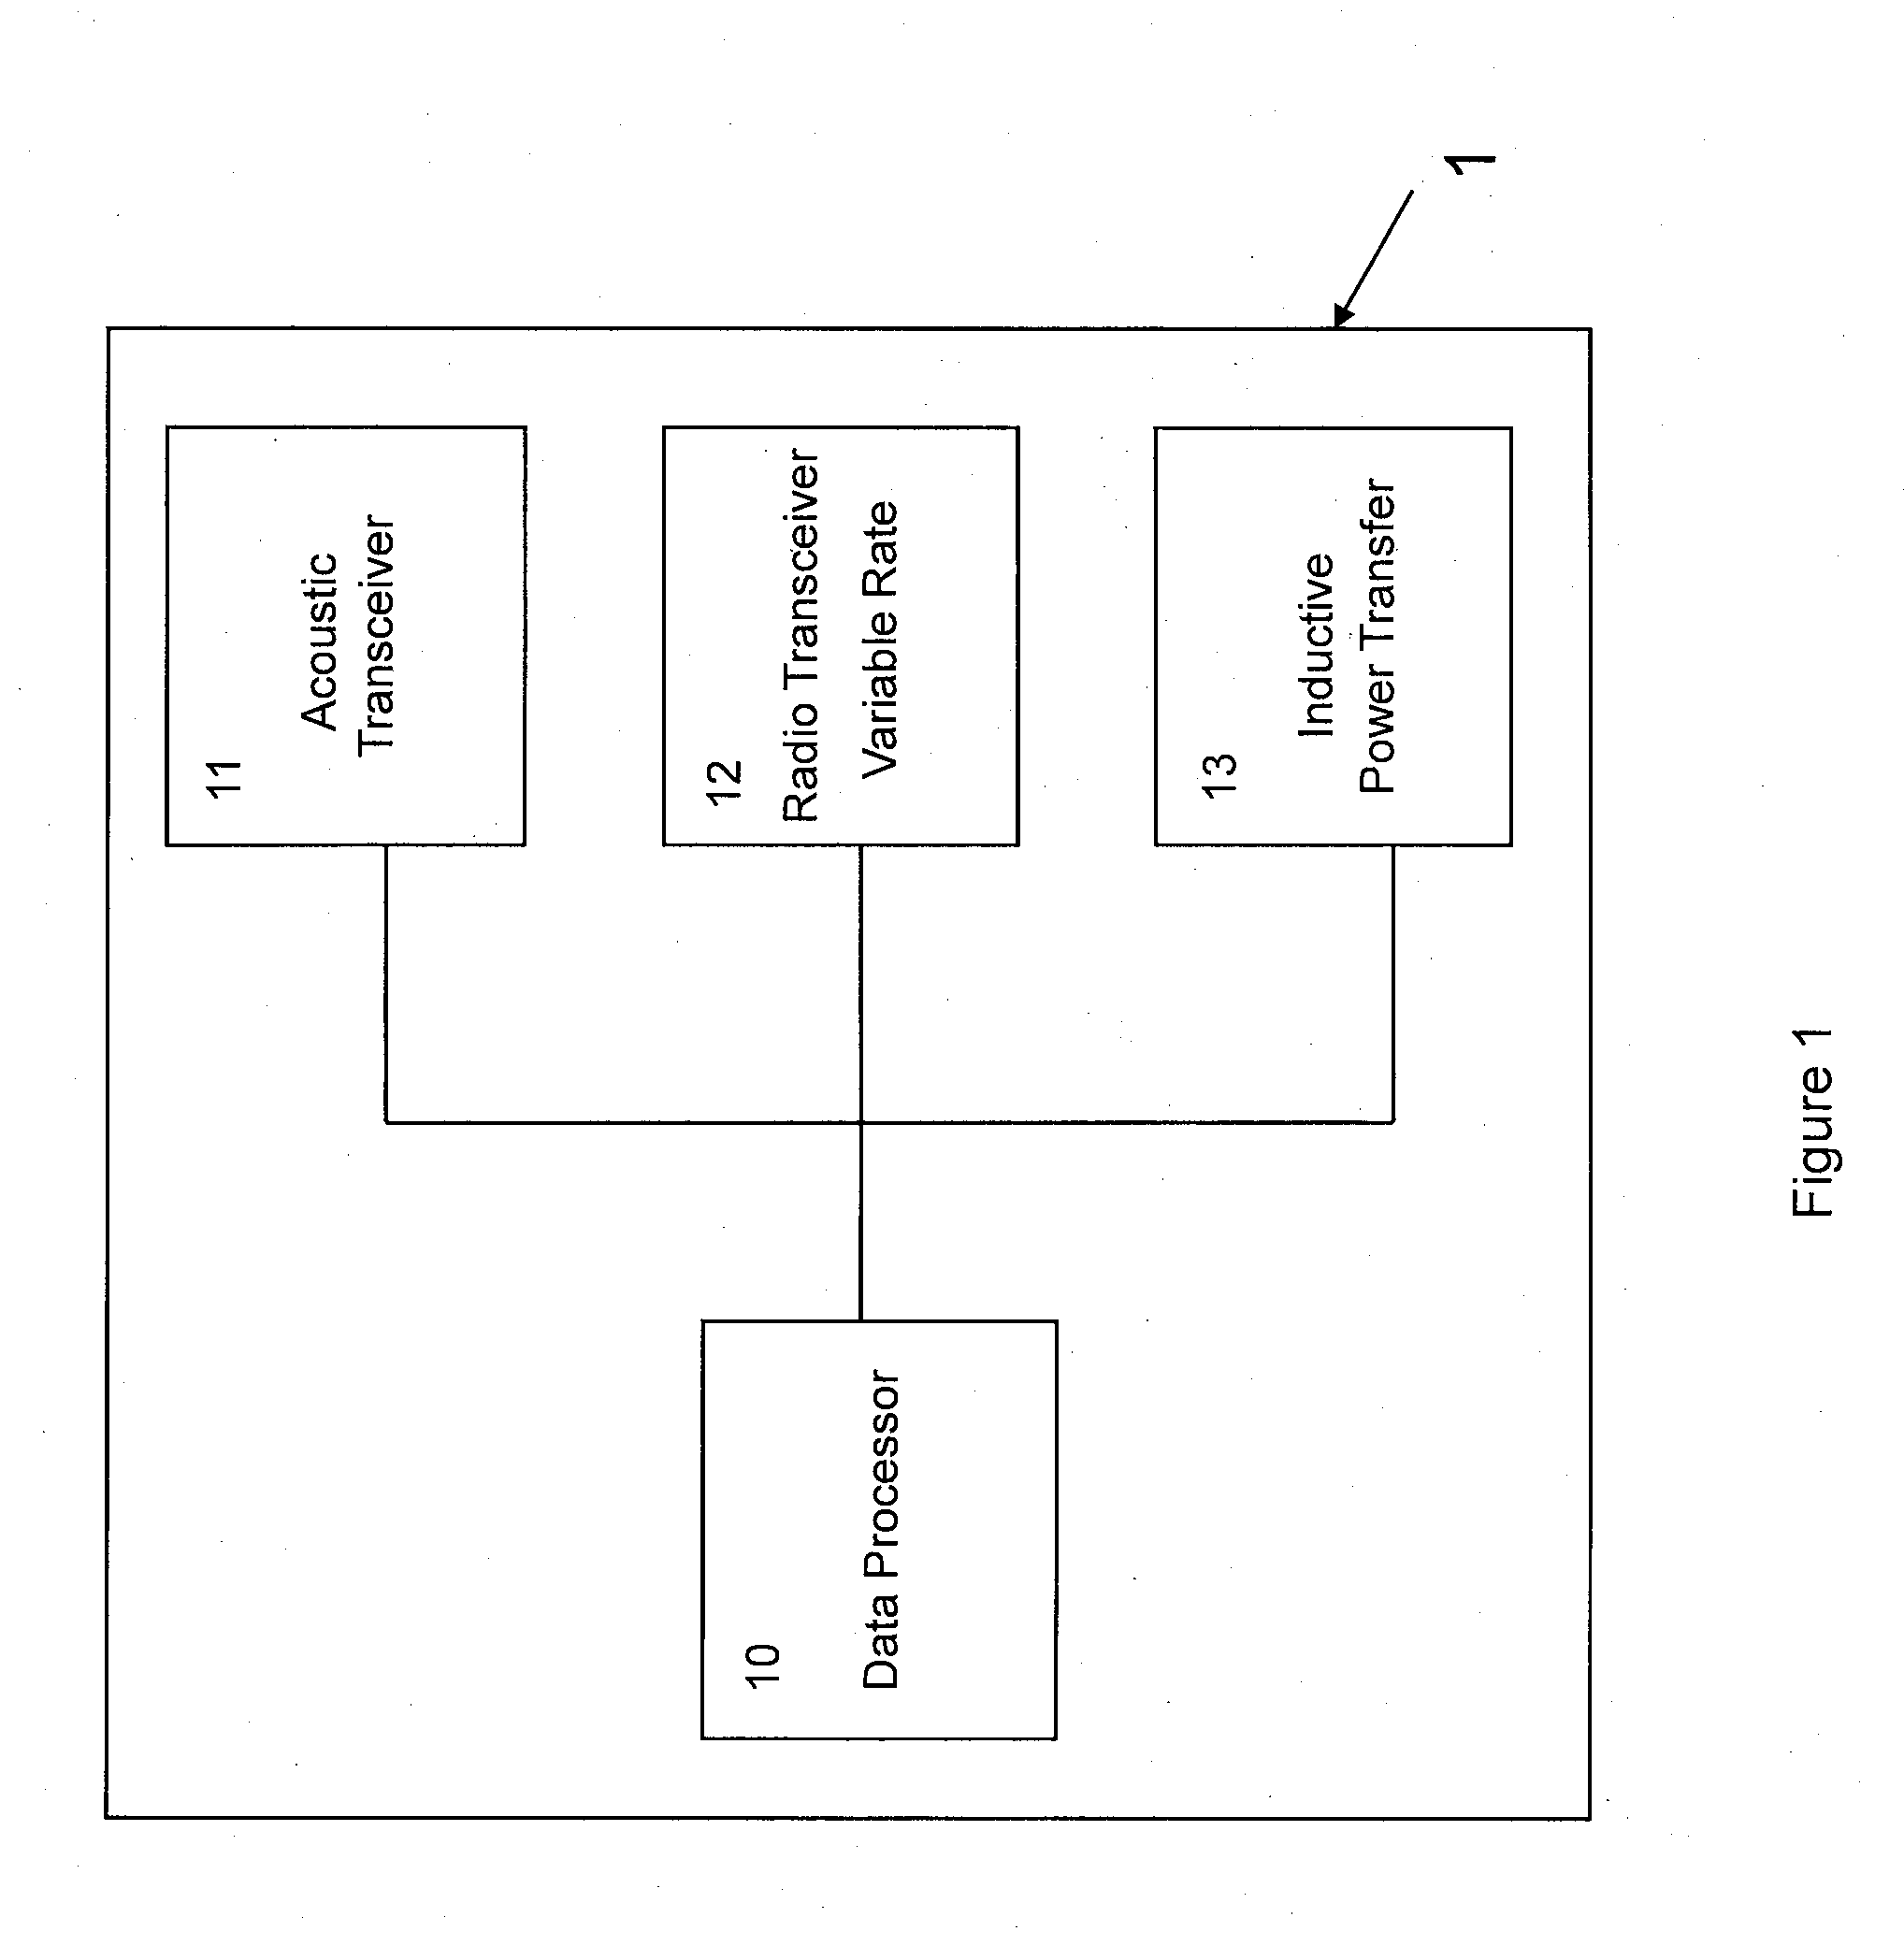 Subsea transfer system providing wireless data transfer, electrical power transfer and navigation